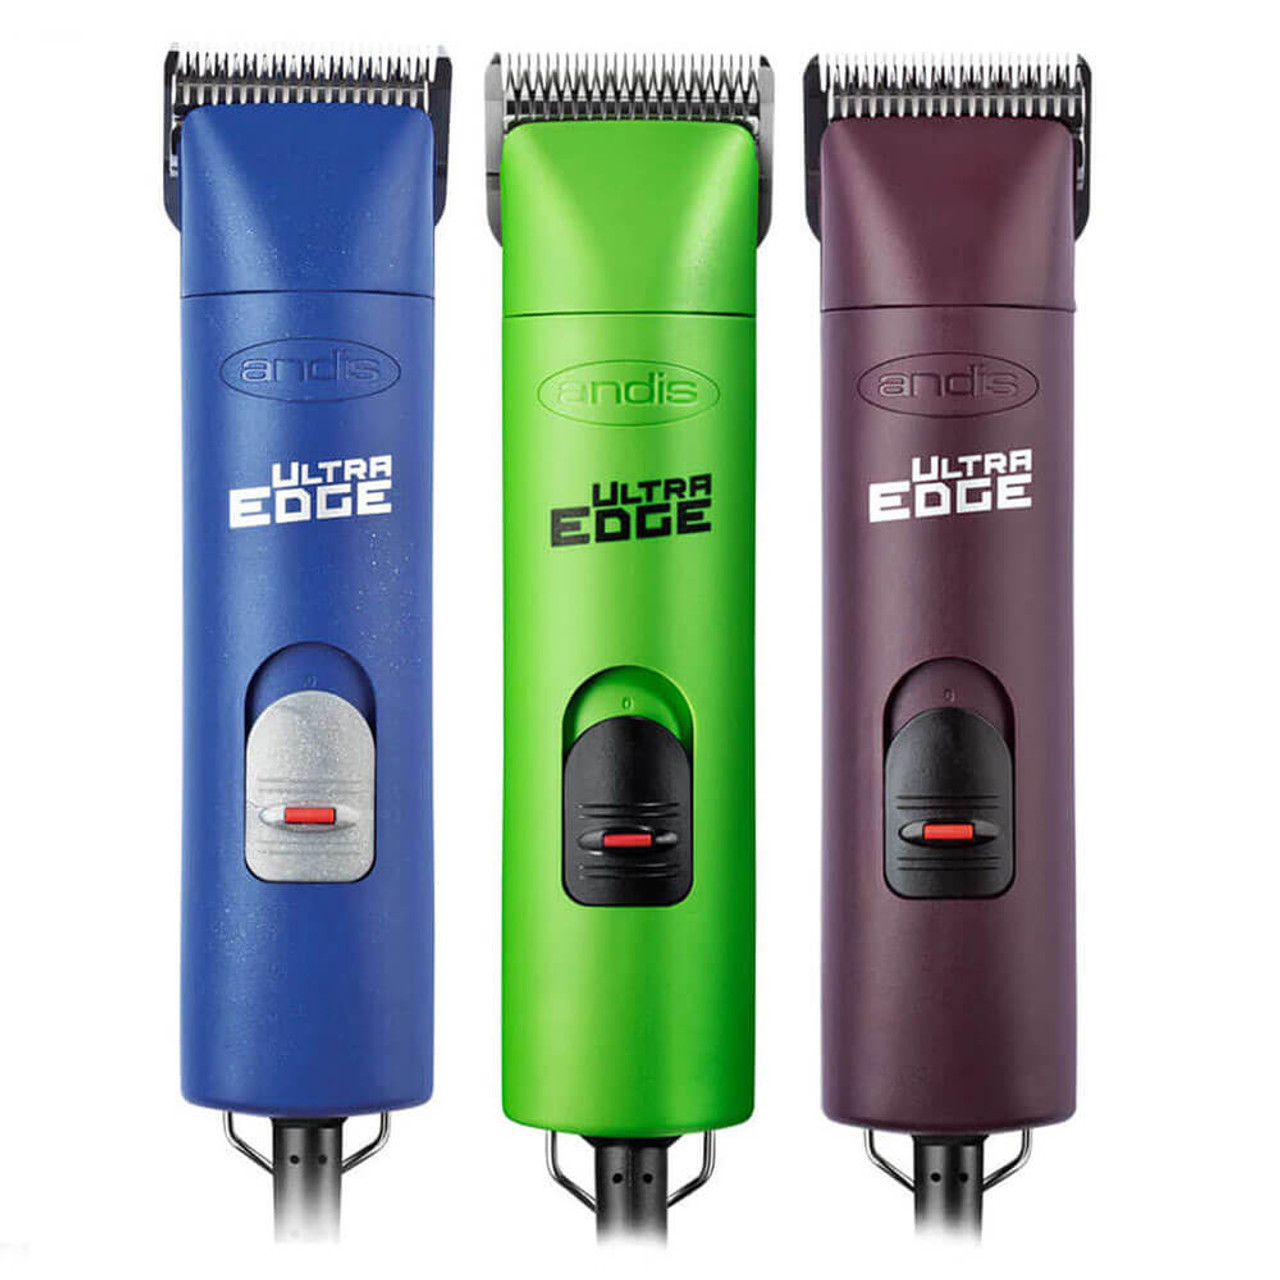 Andis AGC2 Super 2-speed Clippers